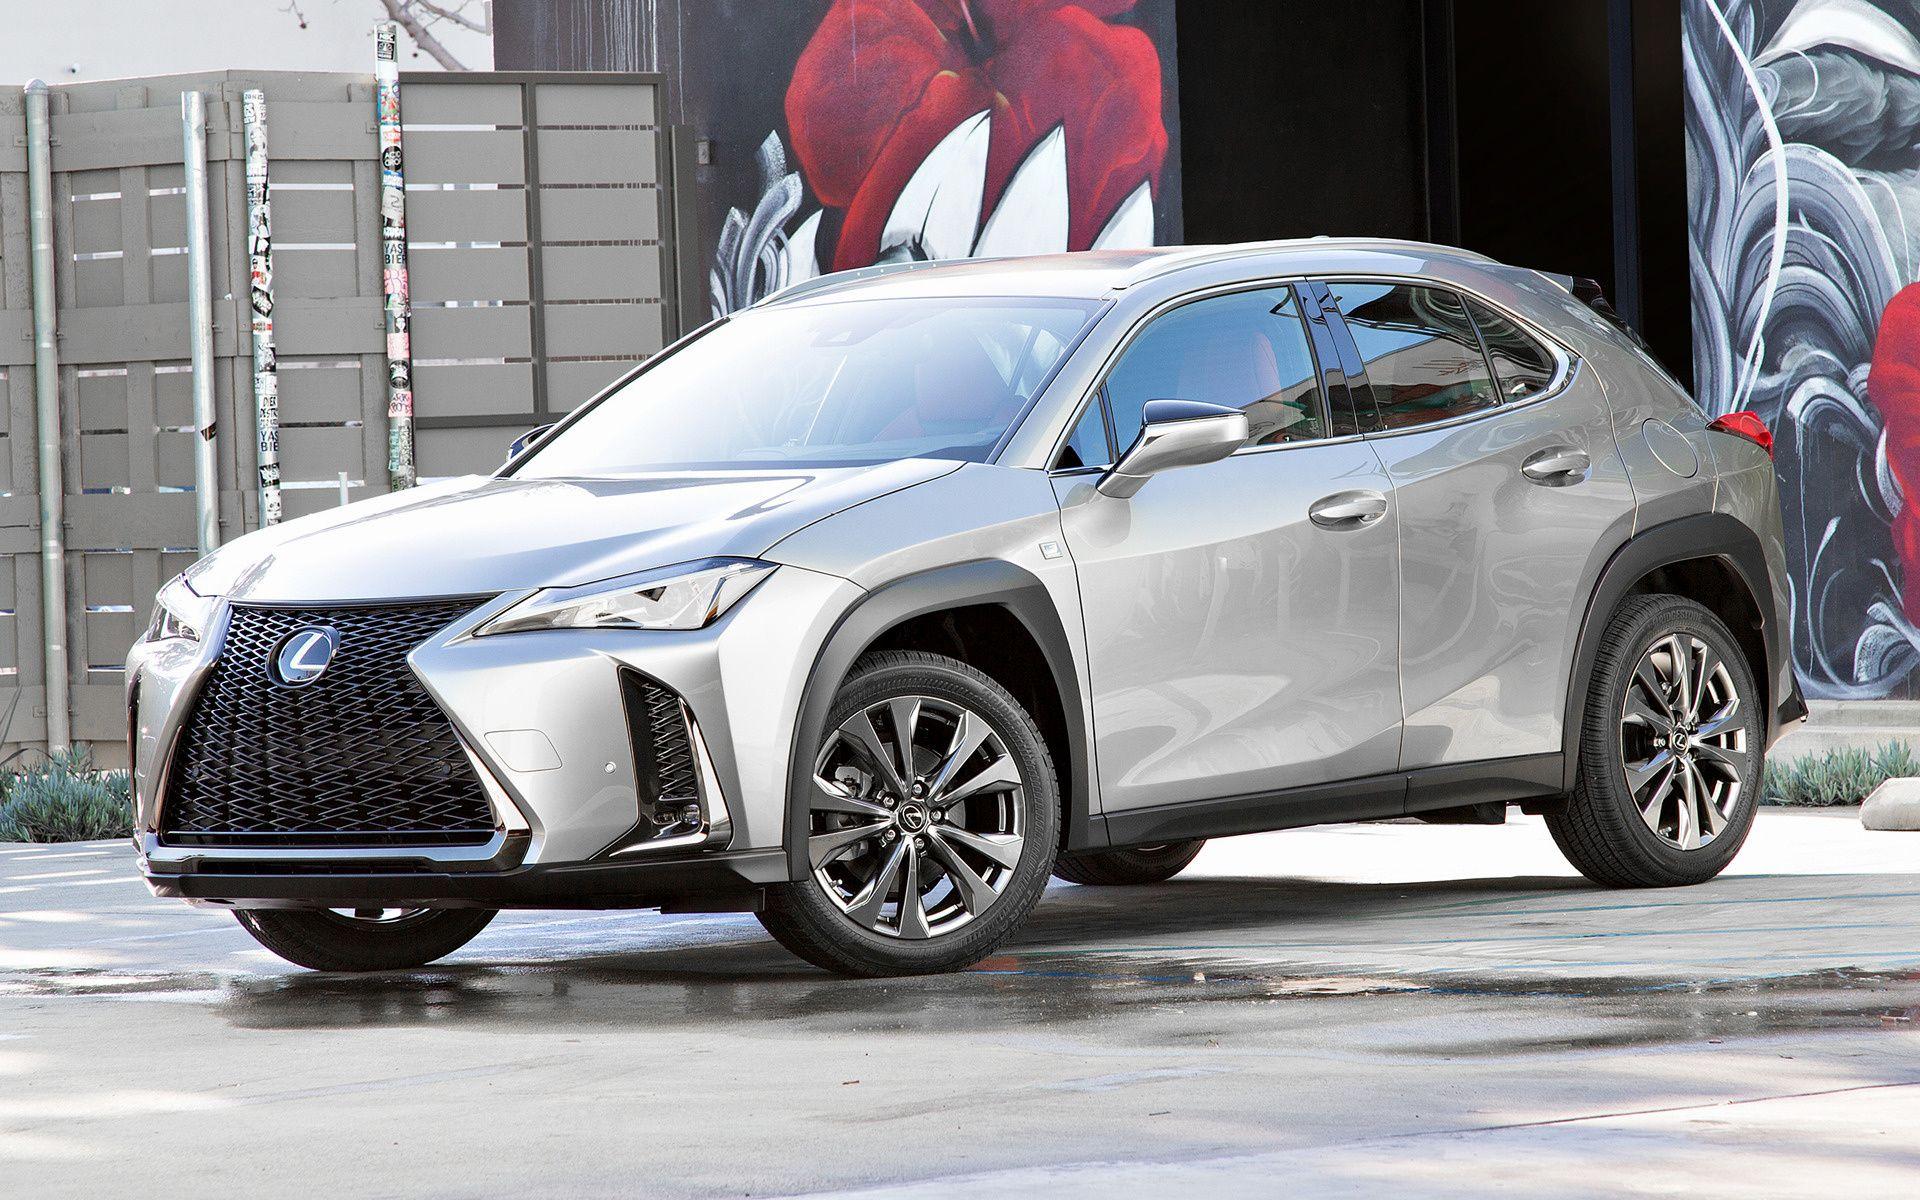 Lexus UX F Sport (US) and HD Image